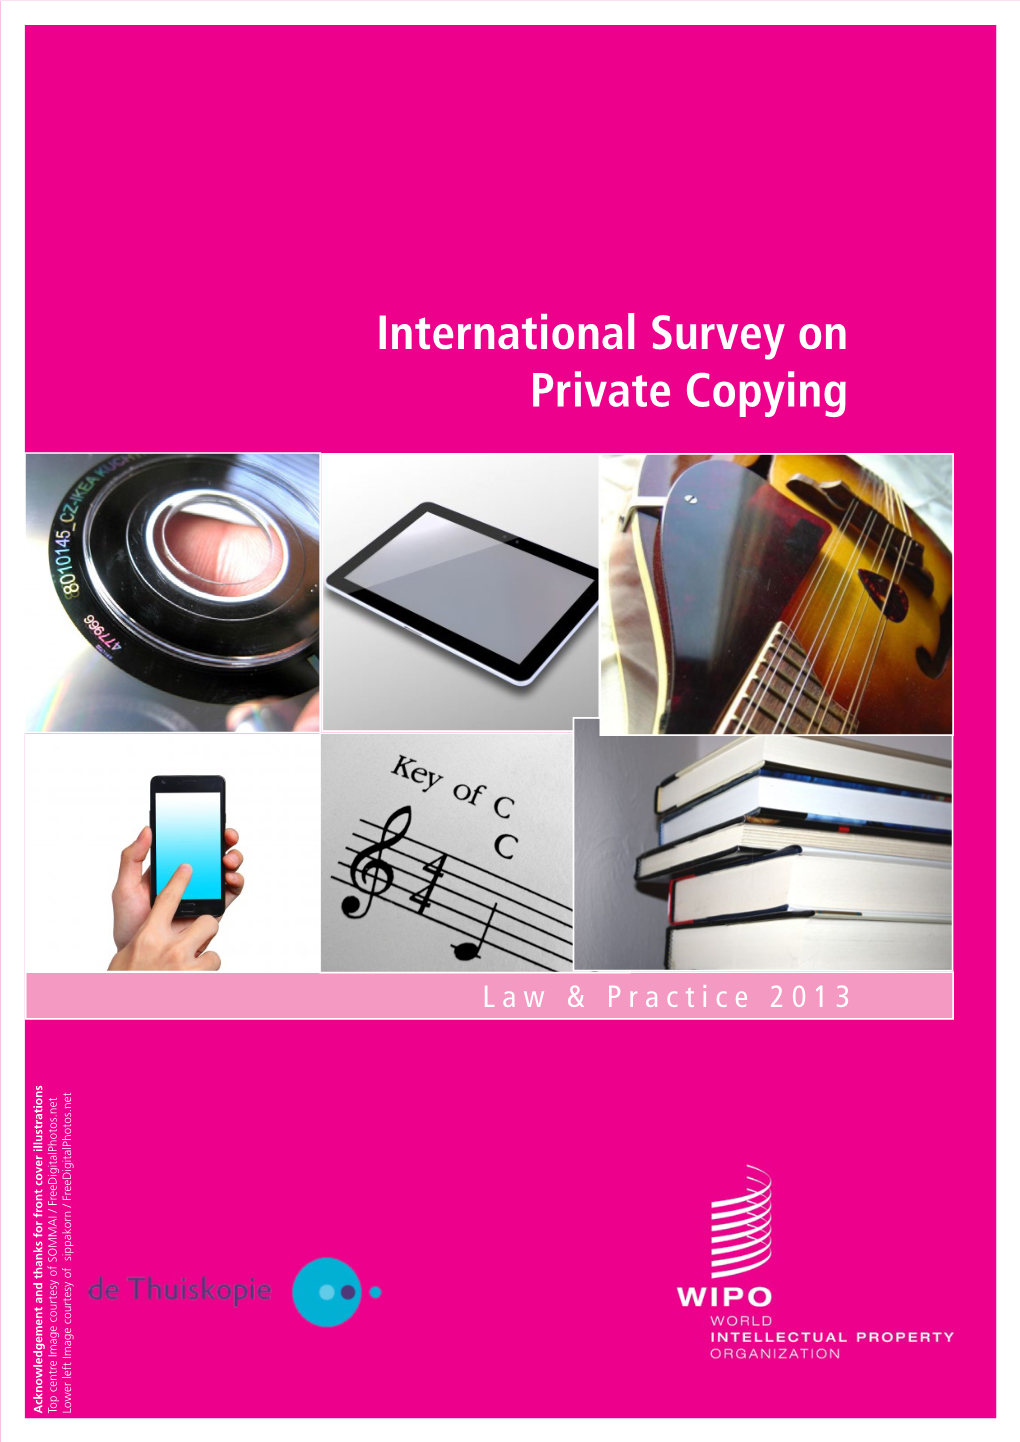 International Survey on Private Copying